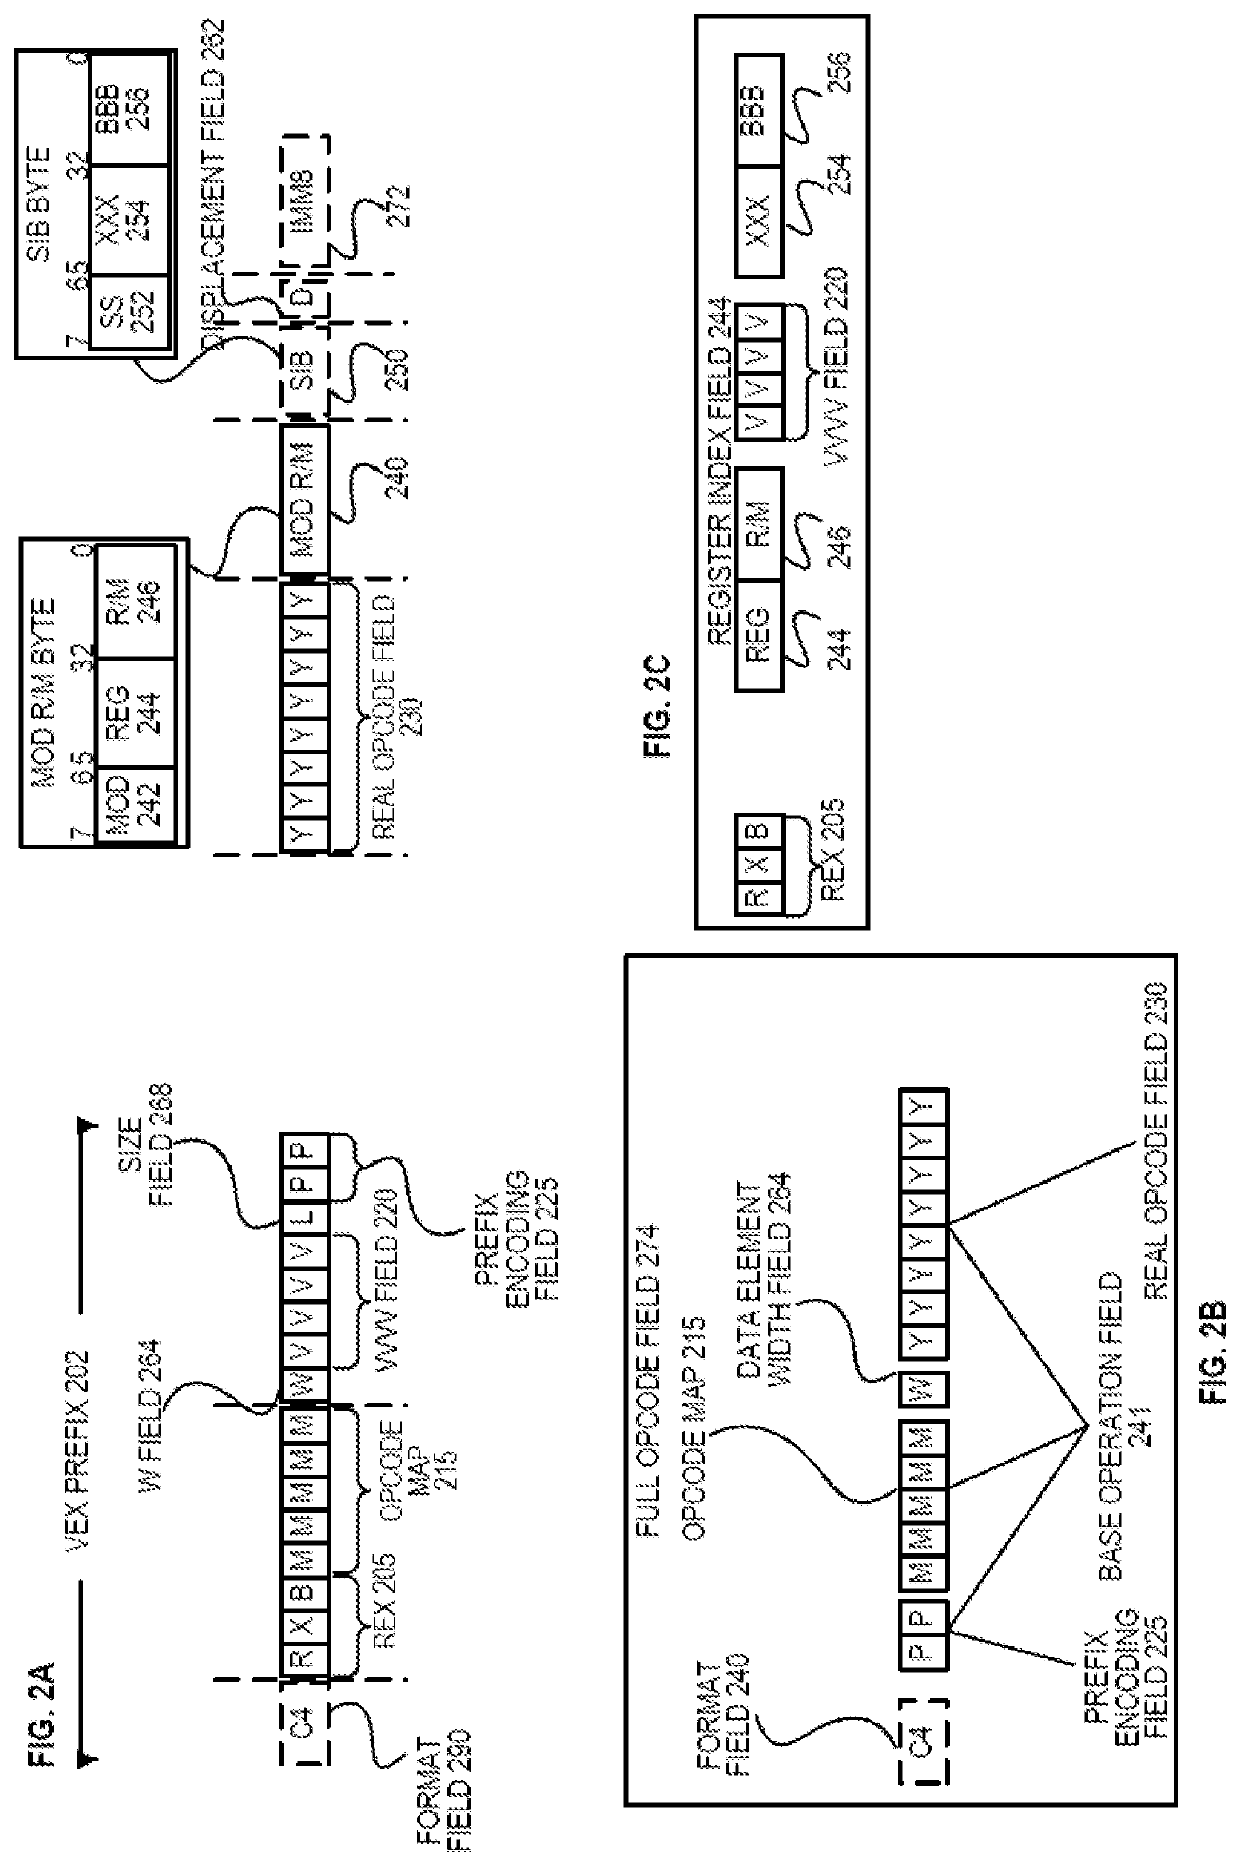 Apparatus and method for dynamic control of microprocessor configuration